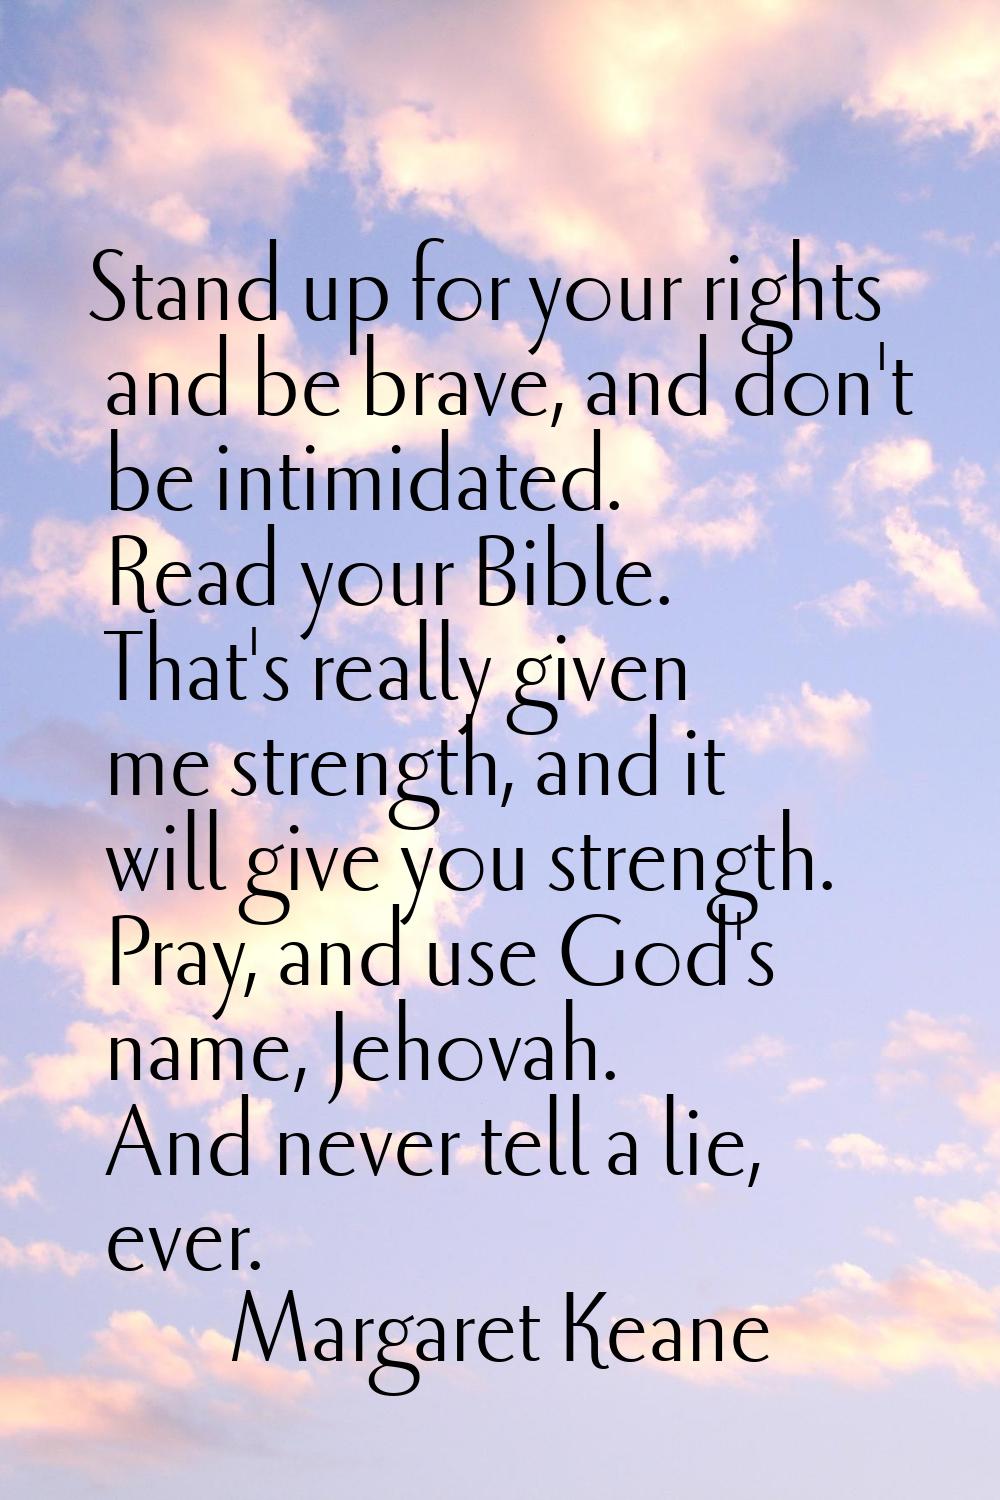 Stand up for your rights and be brave, and don't be intimidated. Read your Bible. That's really giv